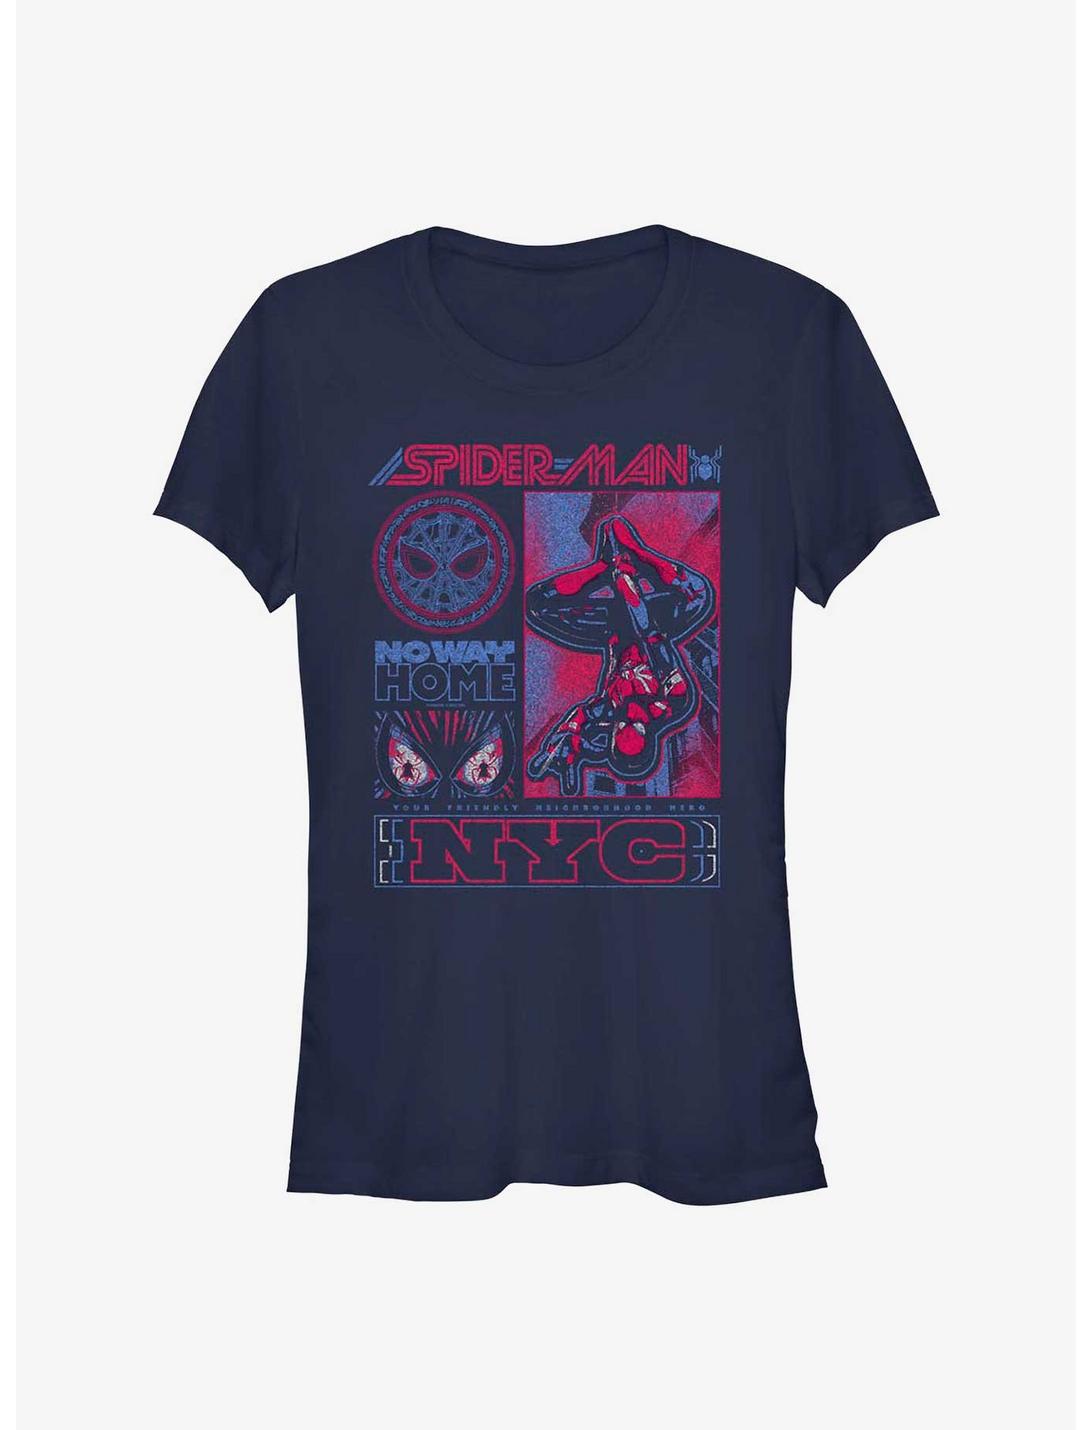 Marvel's Spider-Man Streetwise Girl's T-Shirt, NAVY, hi-res